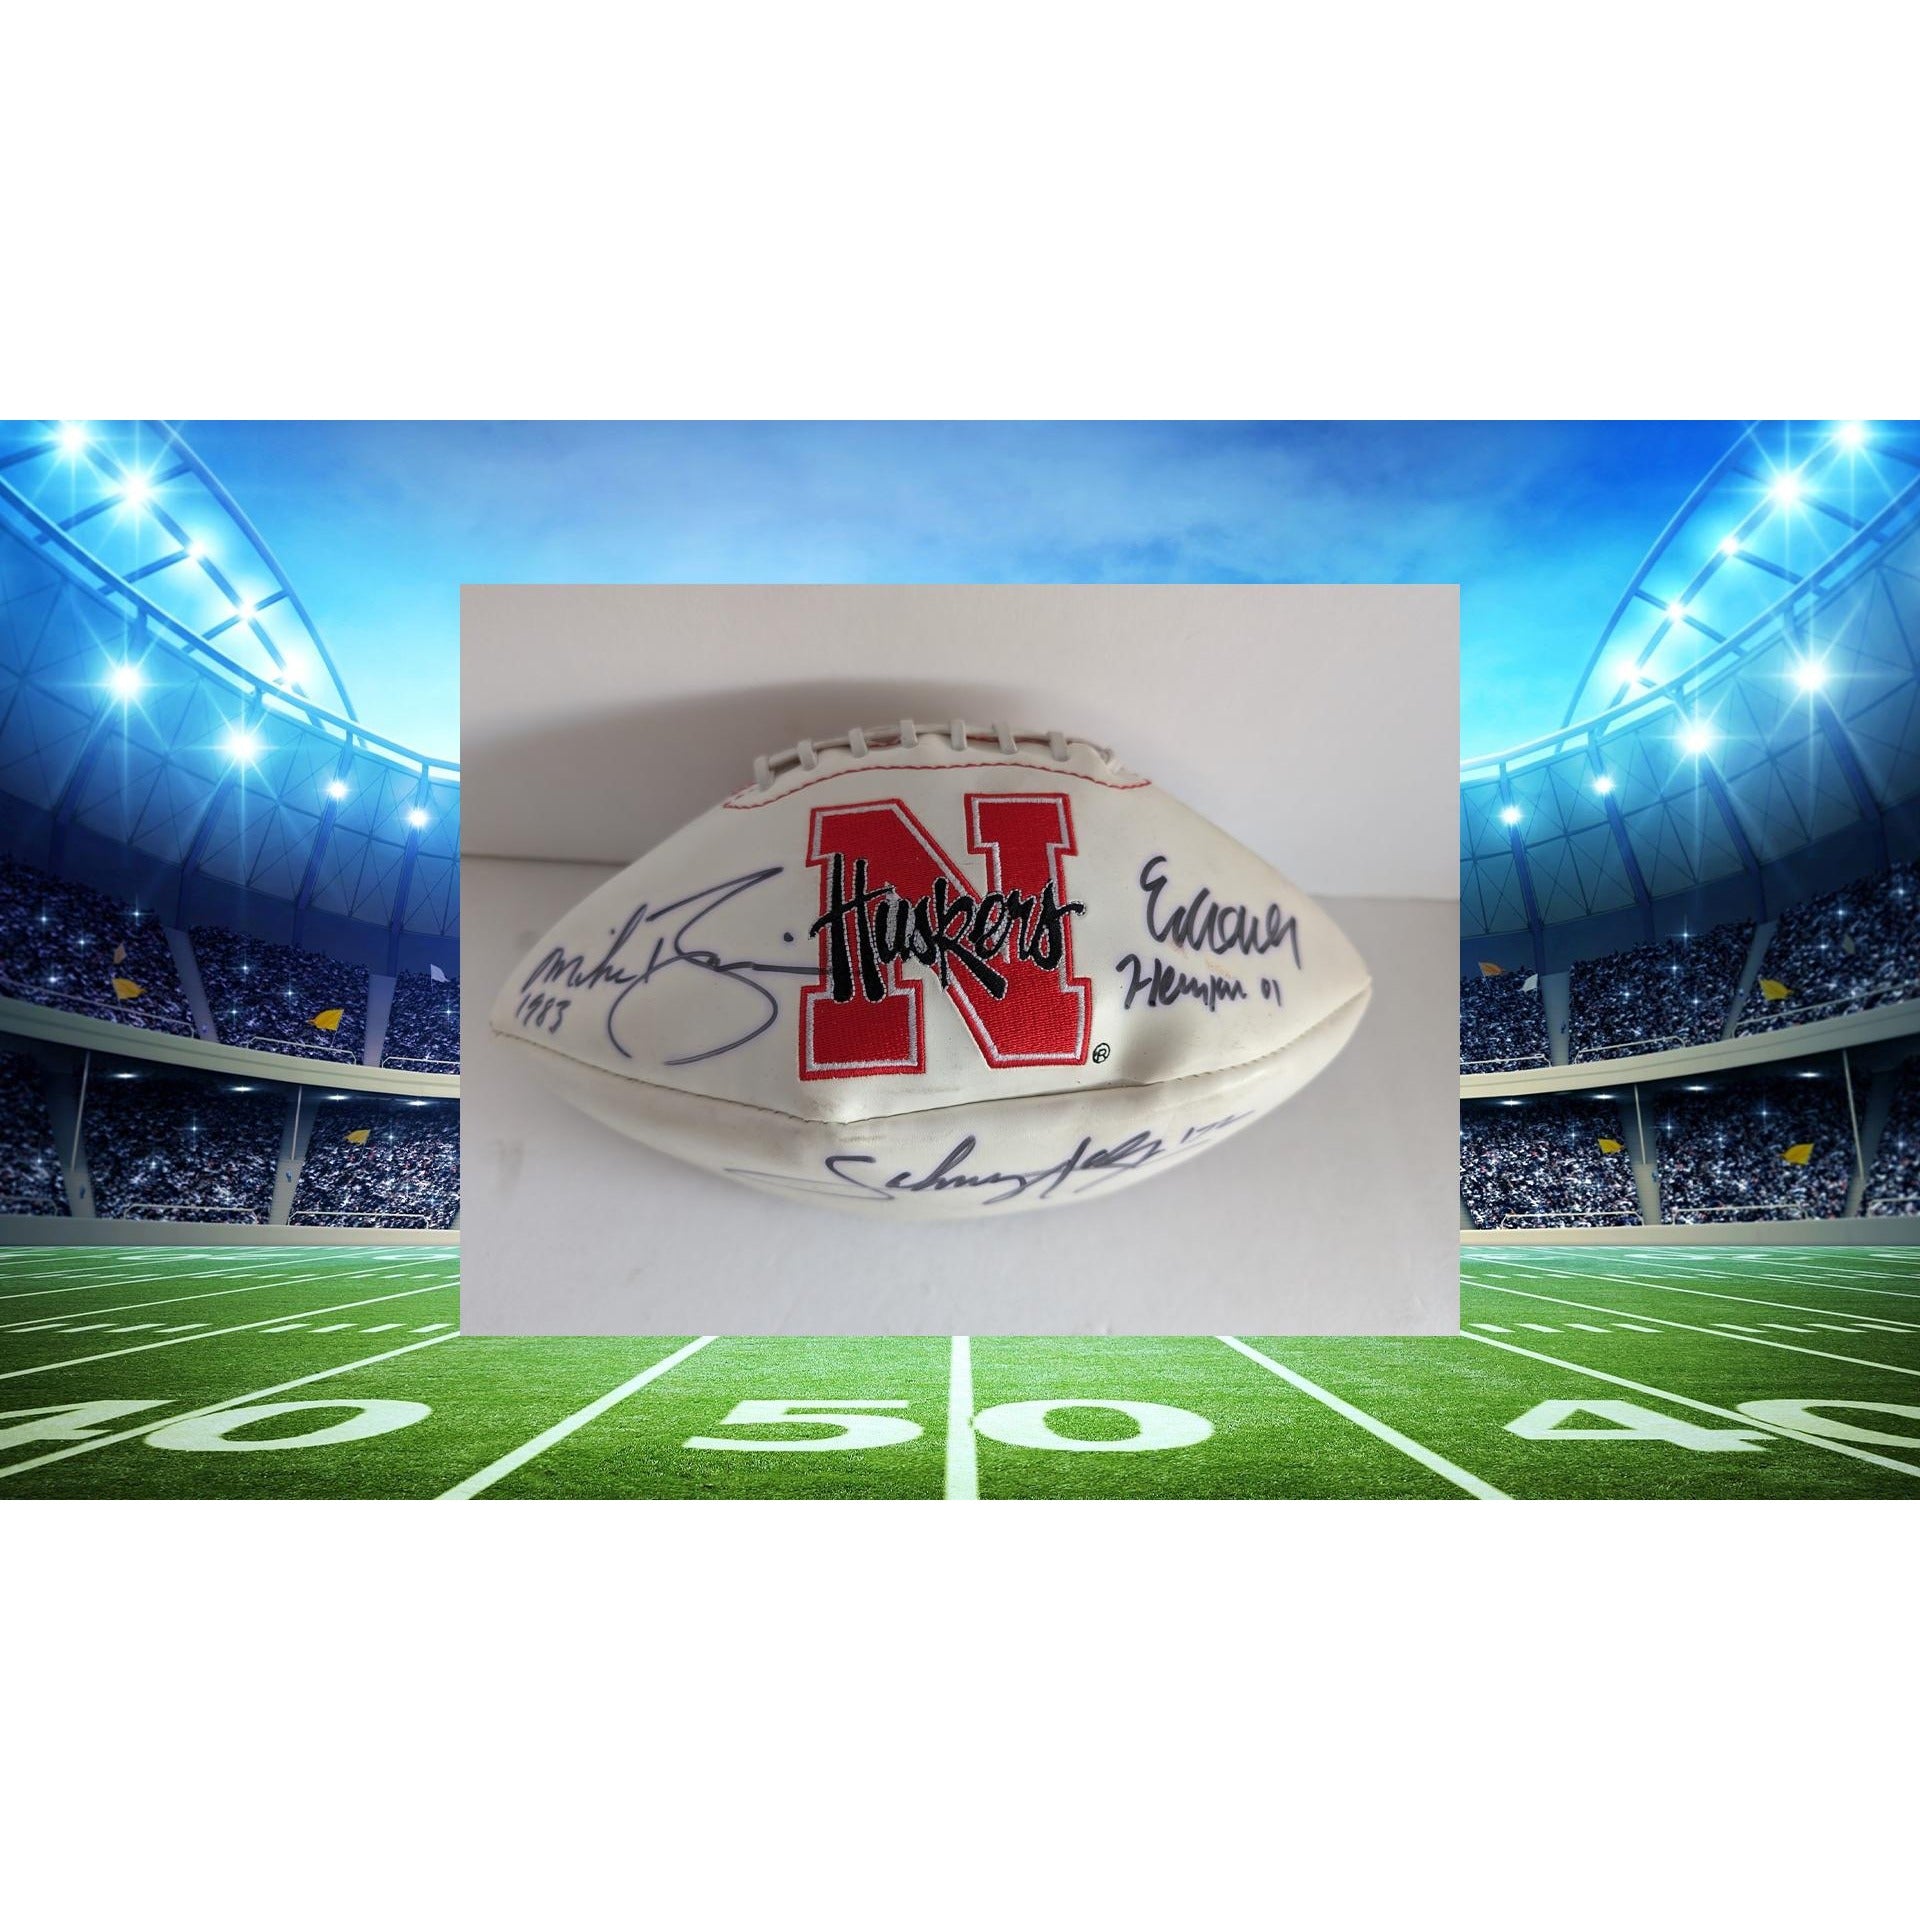 Nebraska Cornhuskers Heisman Trophy award winners Johnny Rodgers Eric Crouch Mike Rozier full size football signed